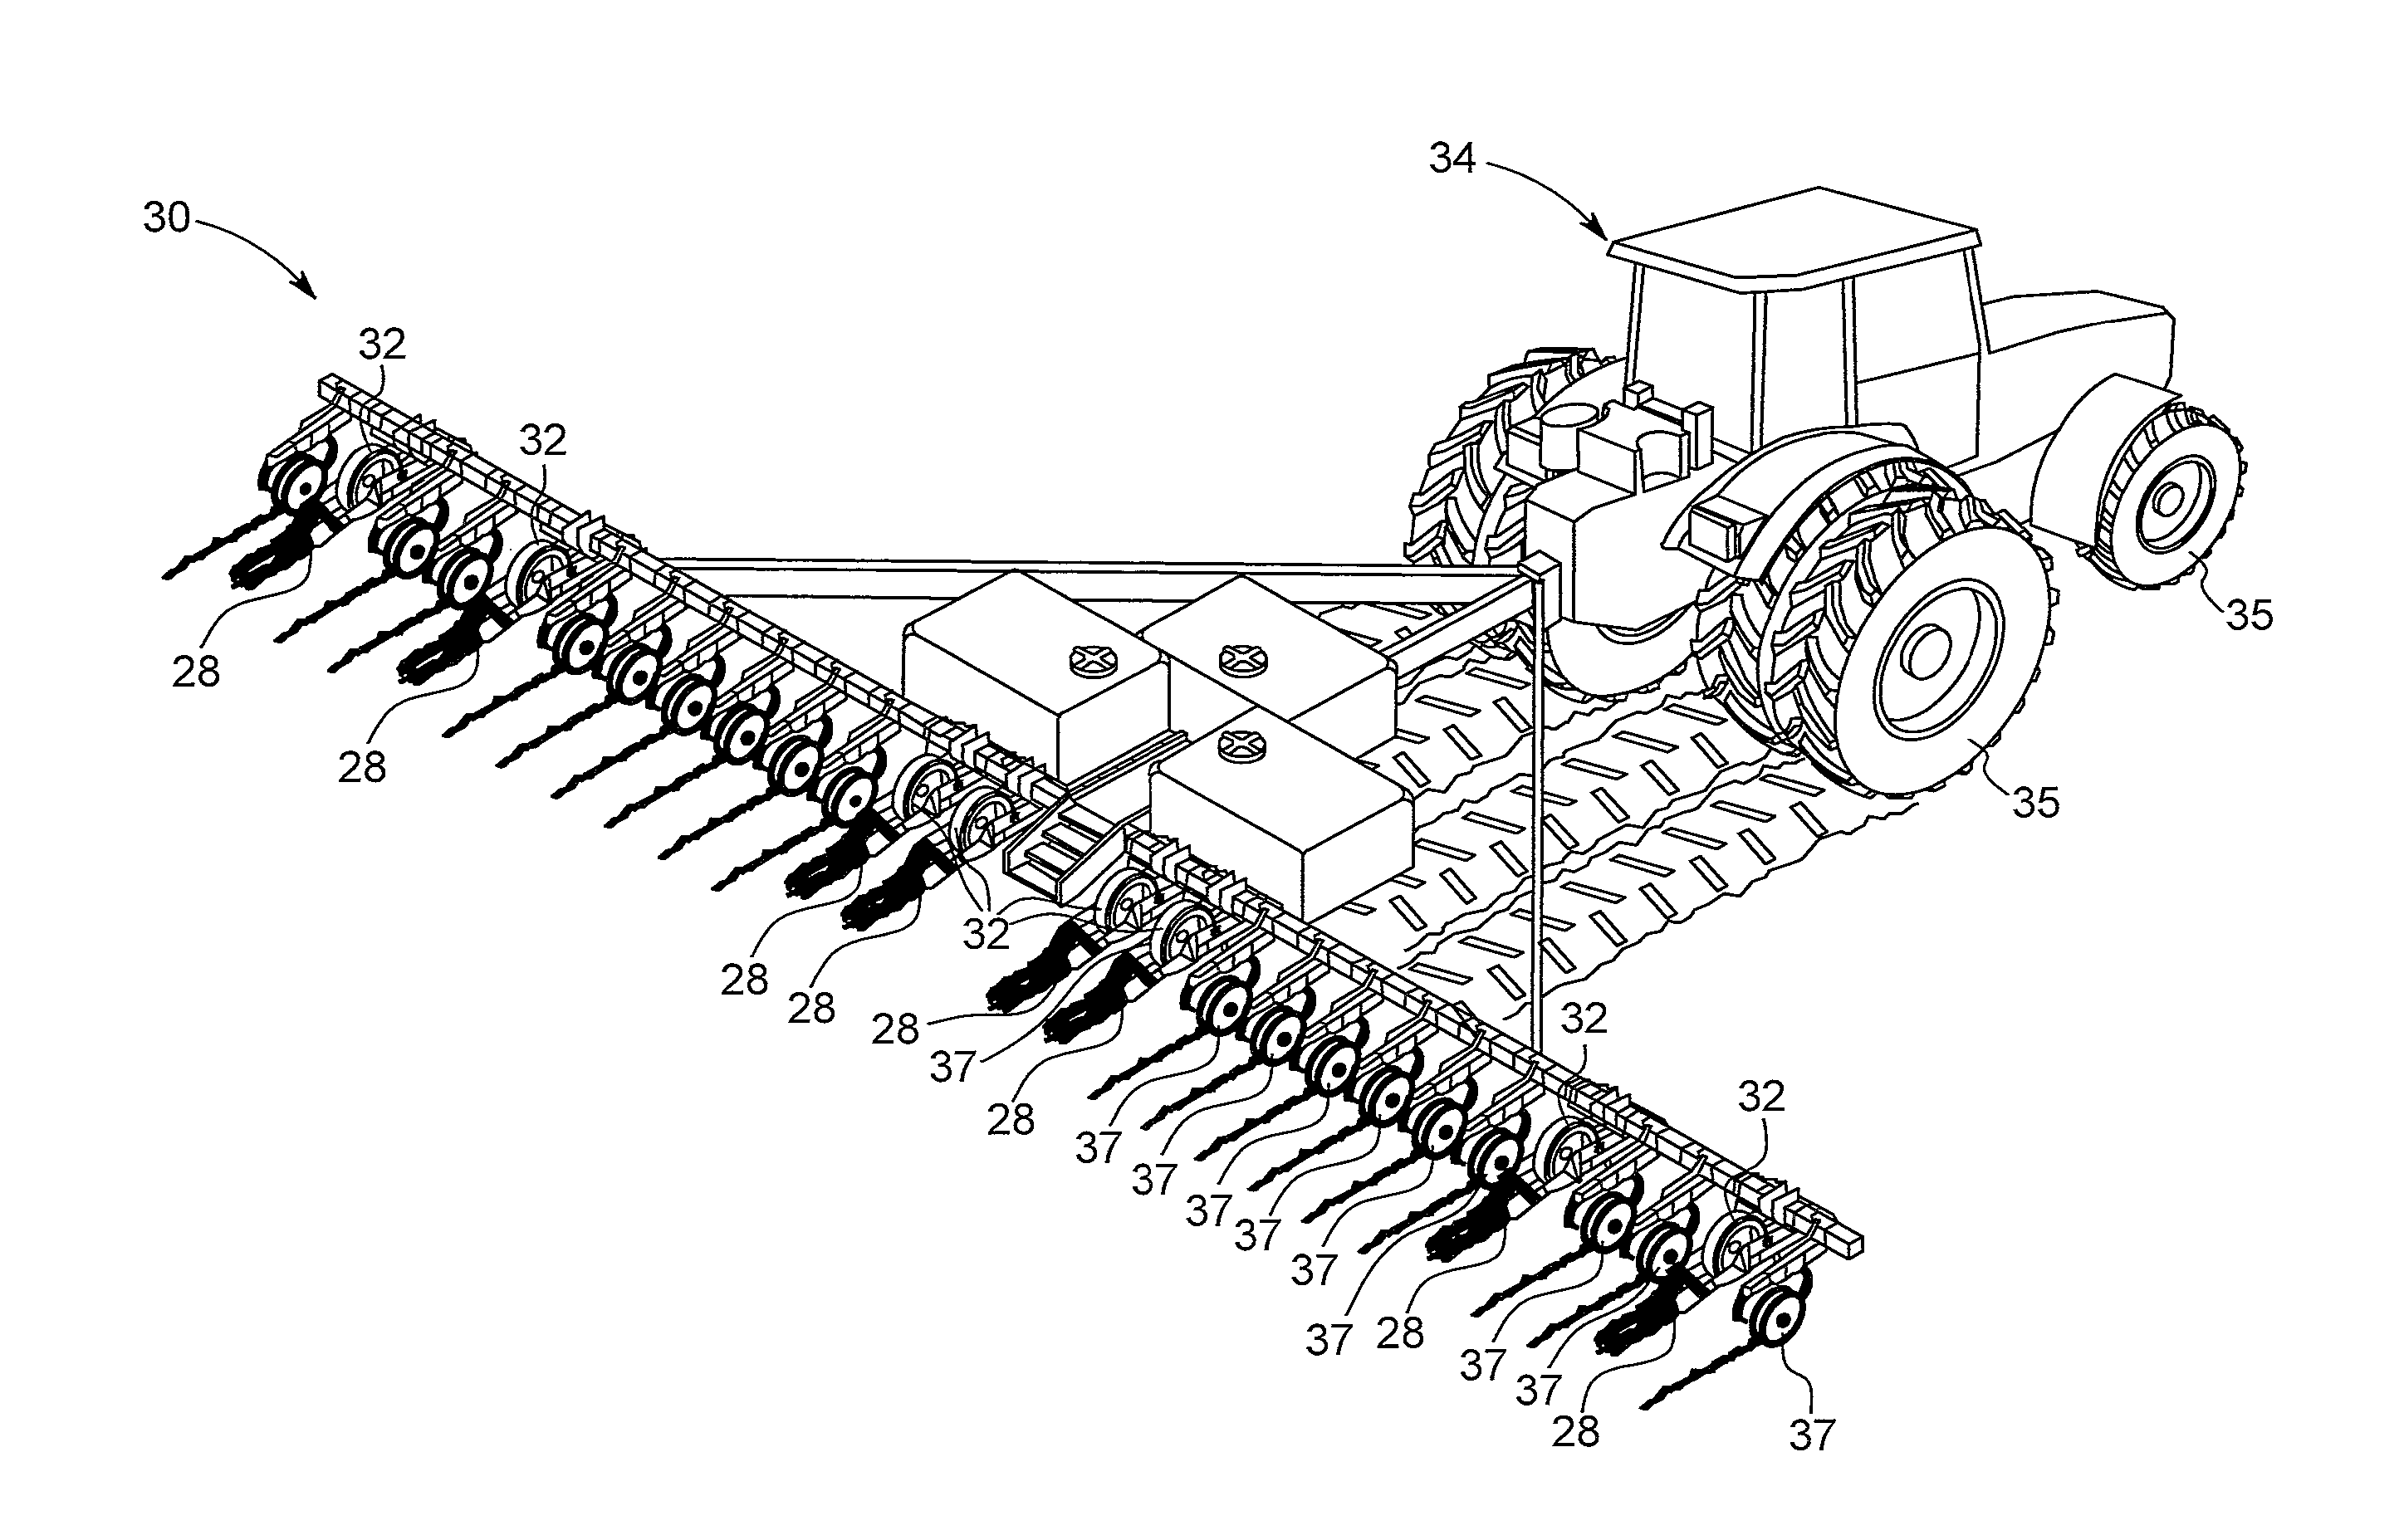 Tillage device for agricultural machinery or implements to reduce compaction caused by wheels in a field